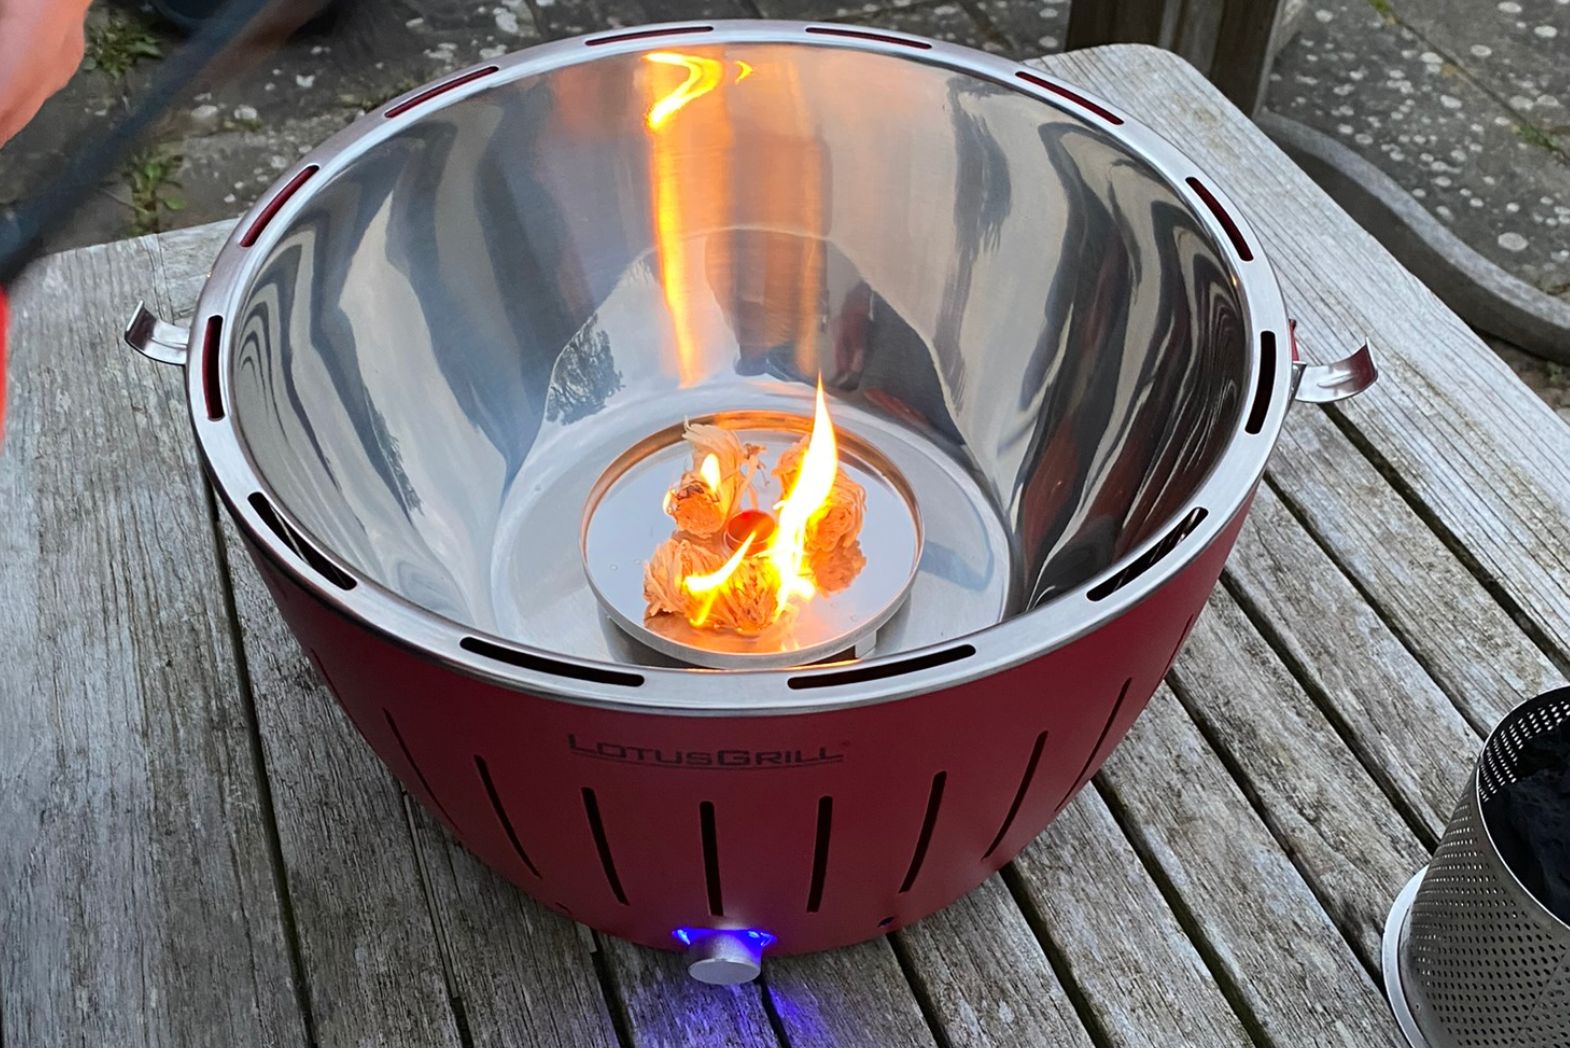 Testing The LotusGrill Barbecue – Our LotusGrill Review